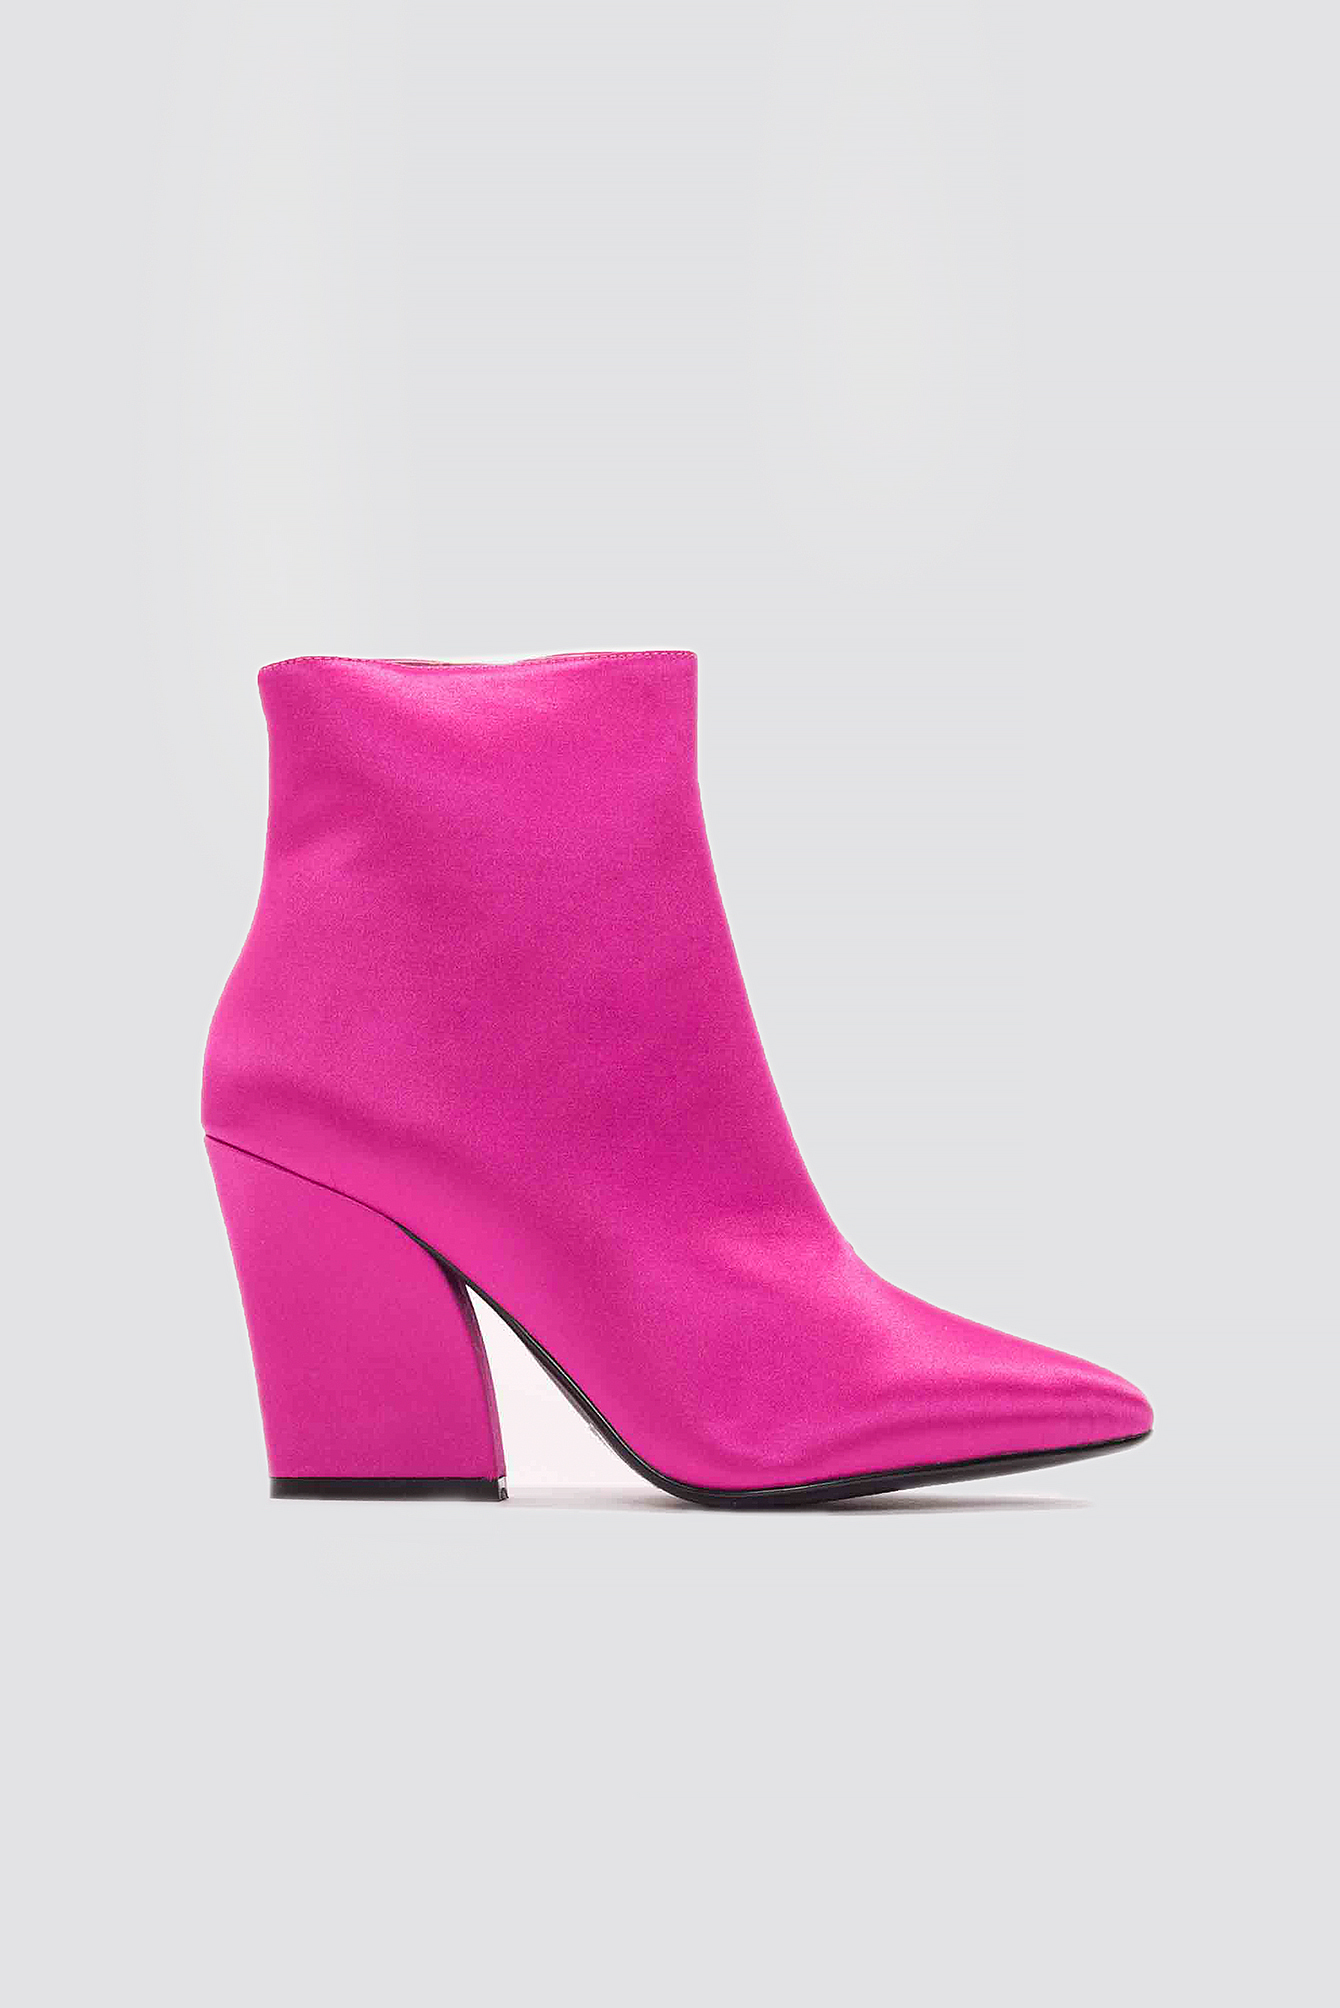 Strong pink NA-KD Shoes Satin Mid Heel Boots